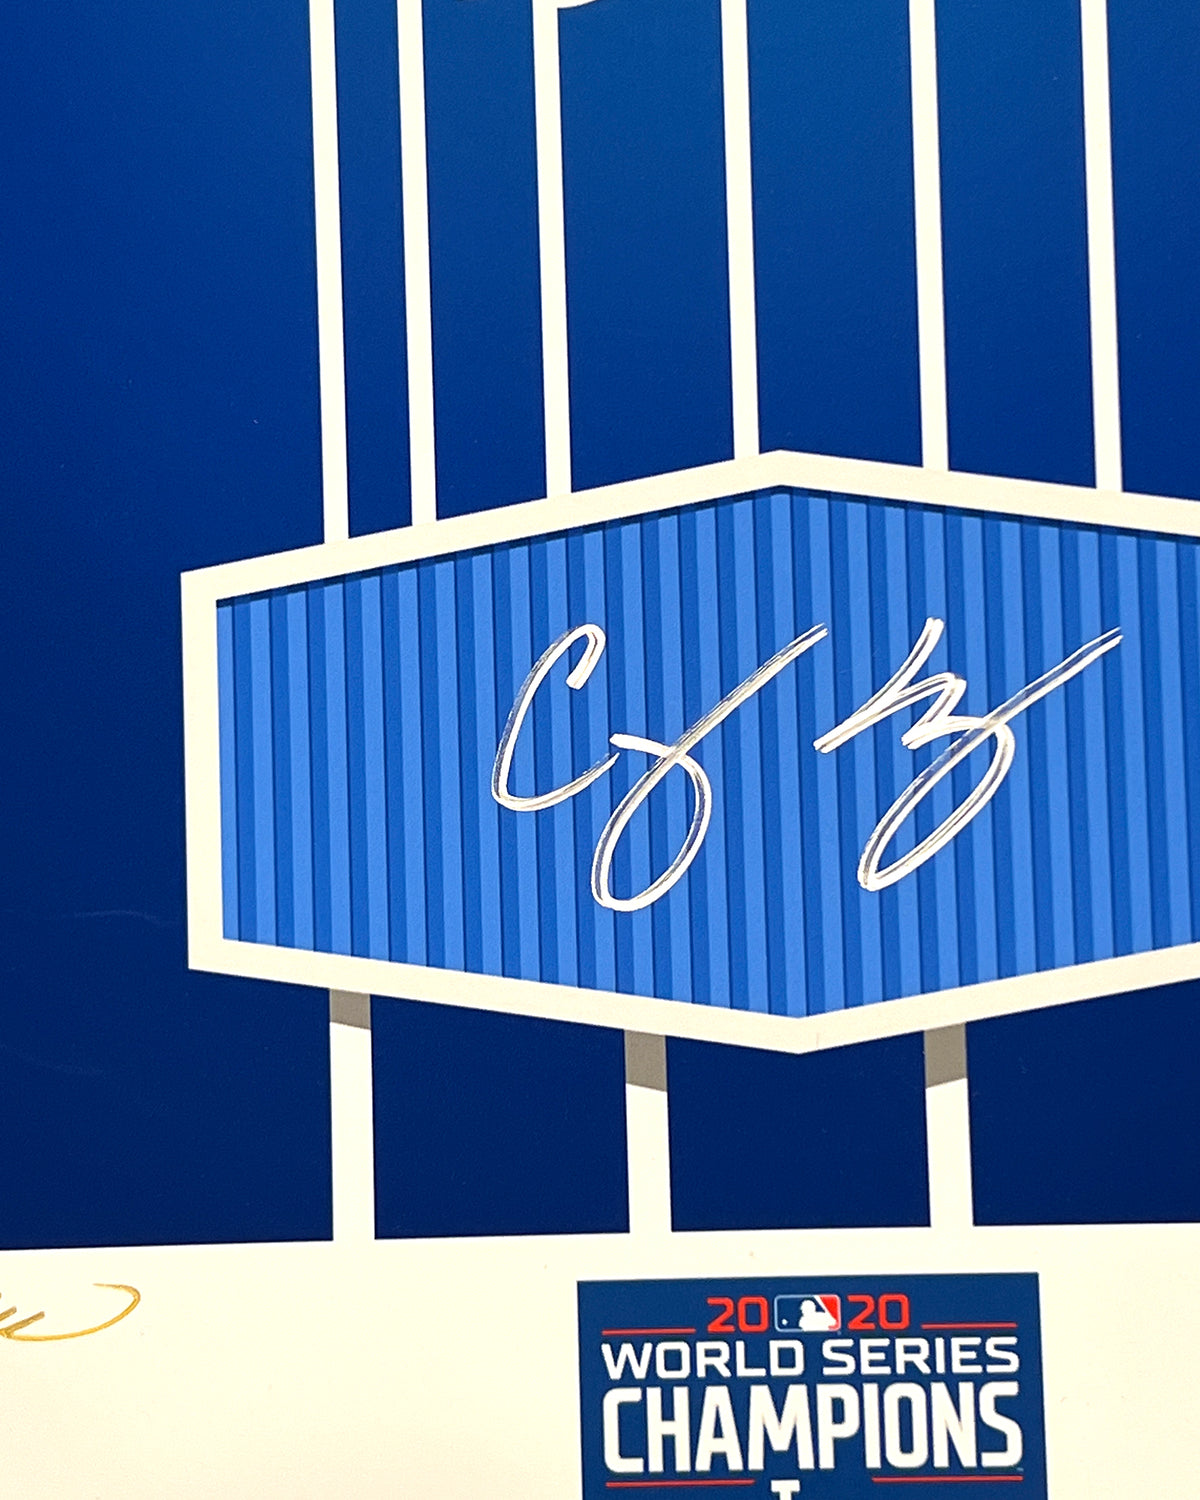 Minimalist World Series 2020 Poster Print - Corey Seager Signed - MLB Authenticated